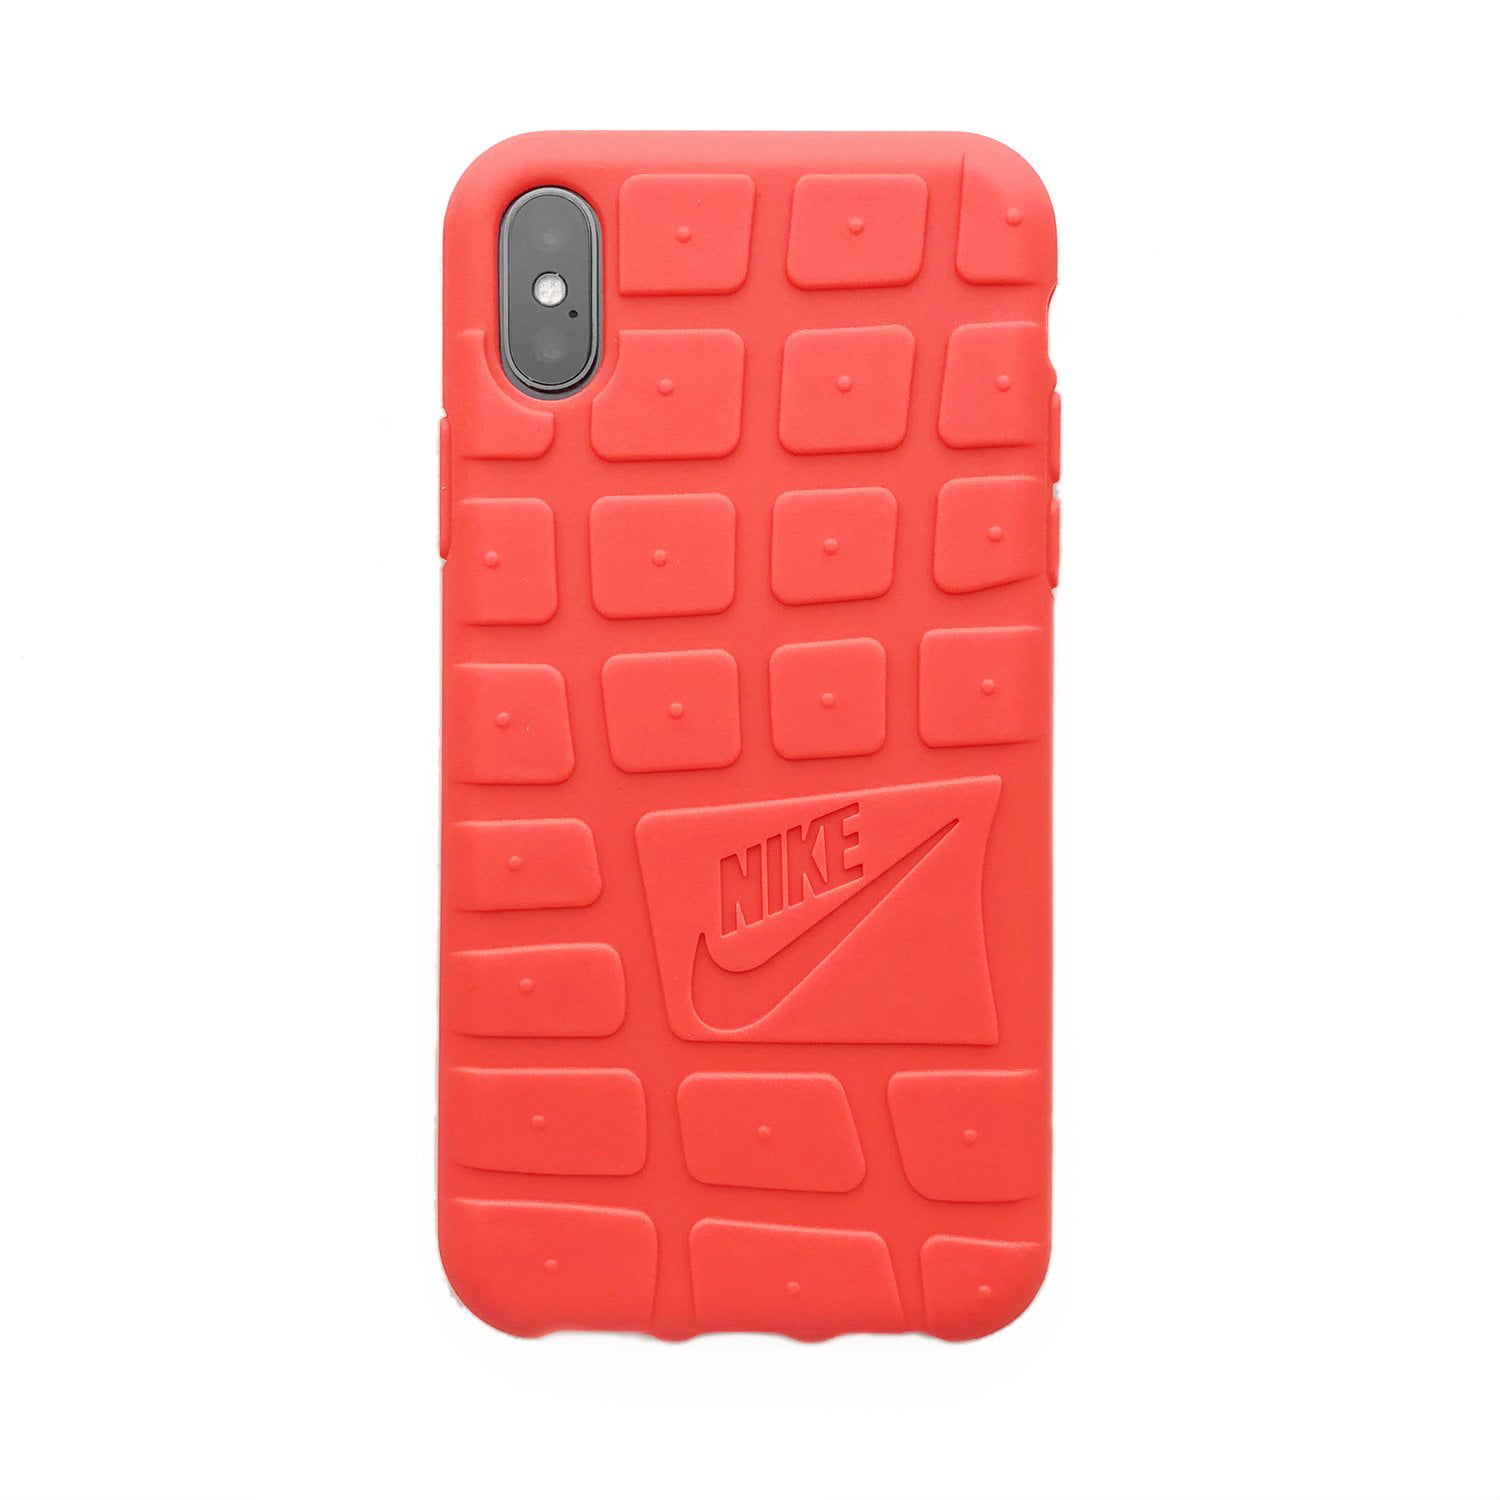 Siesta Mention Suspect Nike Roshe Phone Case for iPhone Xs & iPhone X - Walmart.com